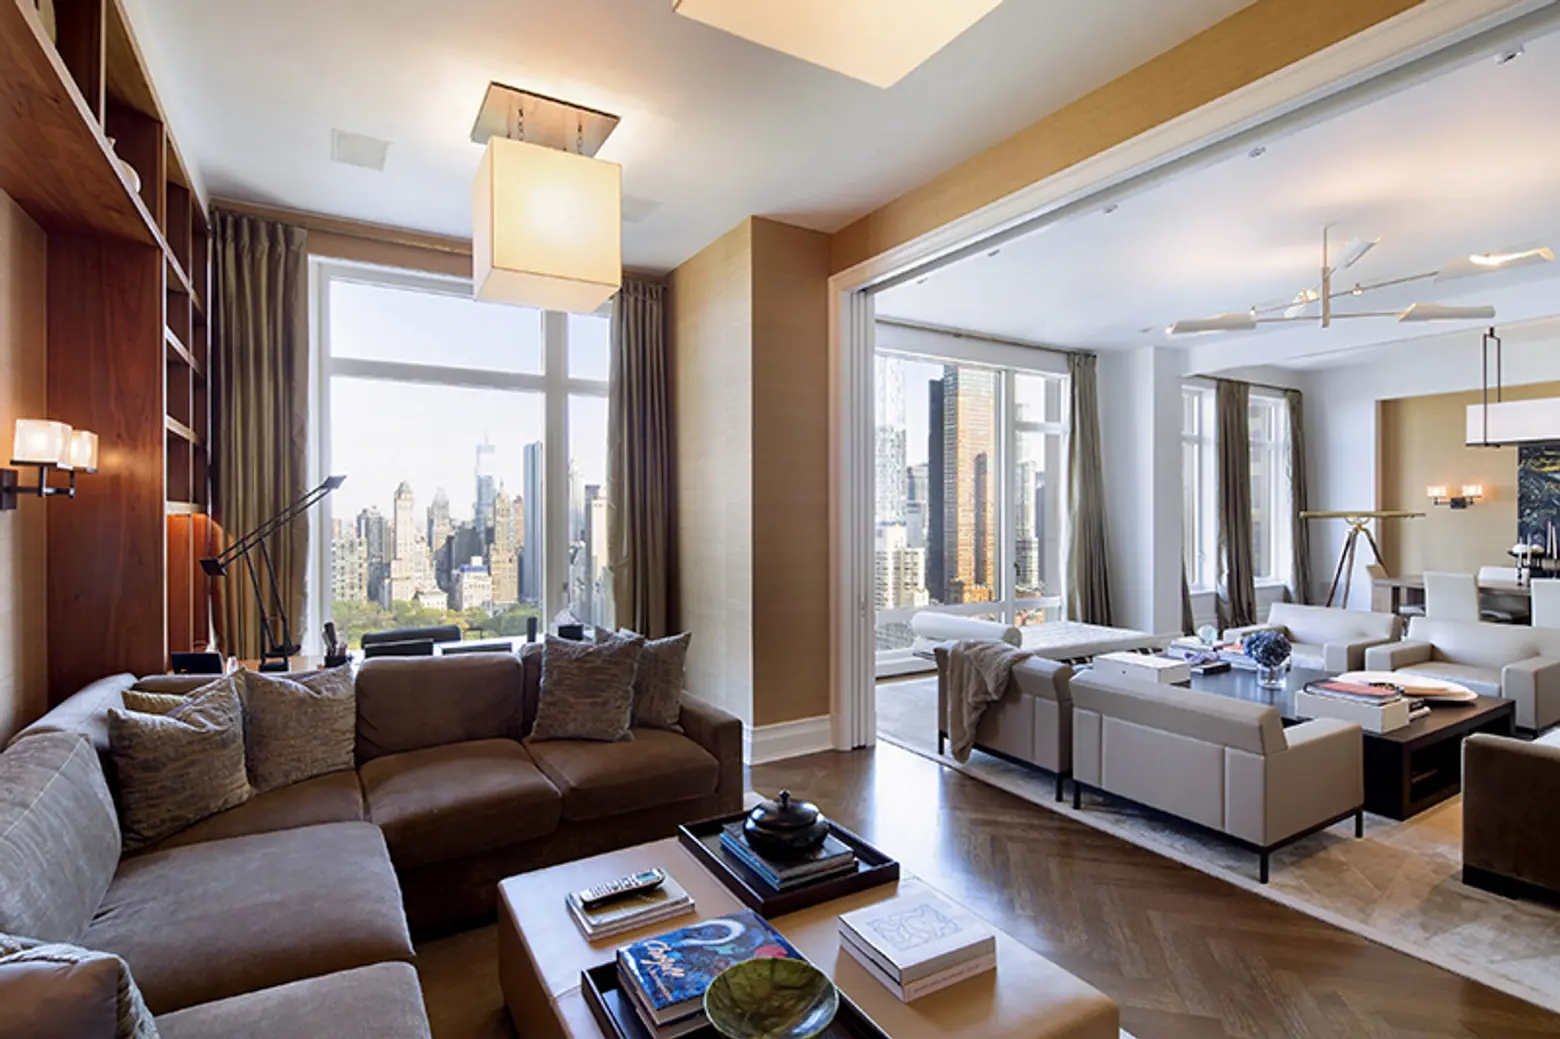 Robert A.M. Stern, 15 Central Park West, NYC celebrity real estate, Frank Lampard